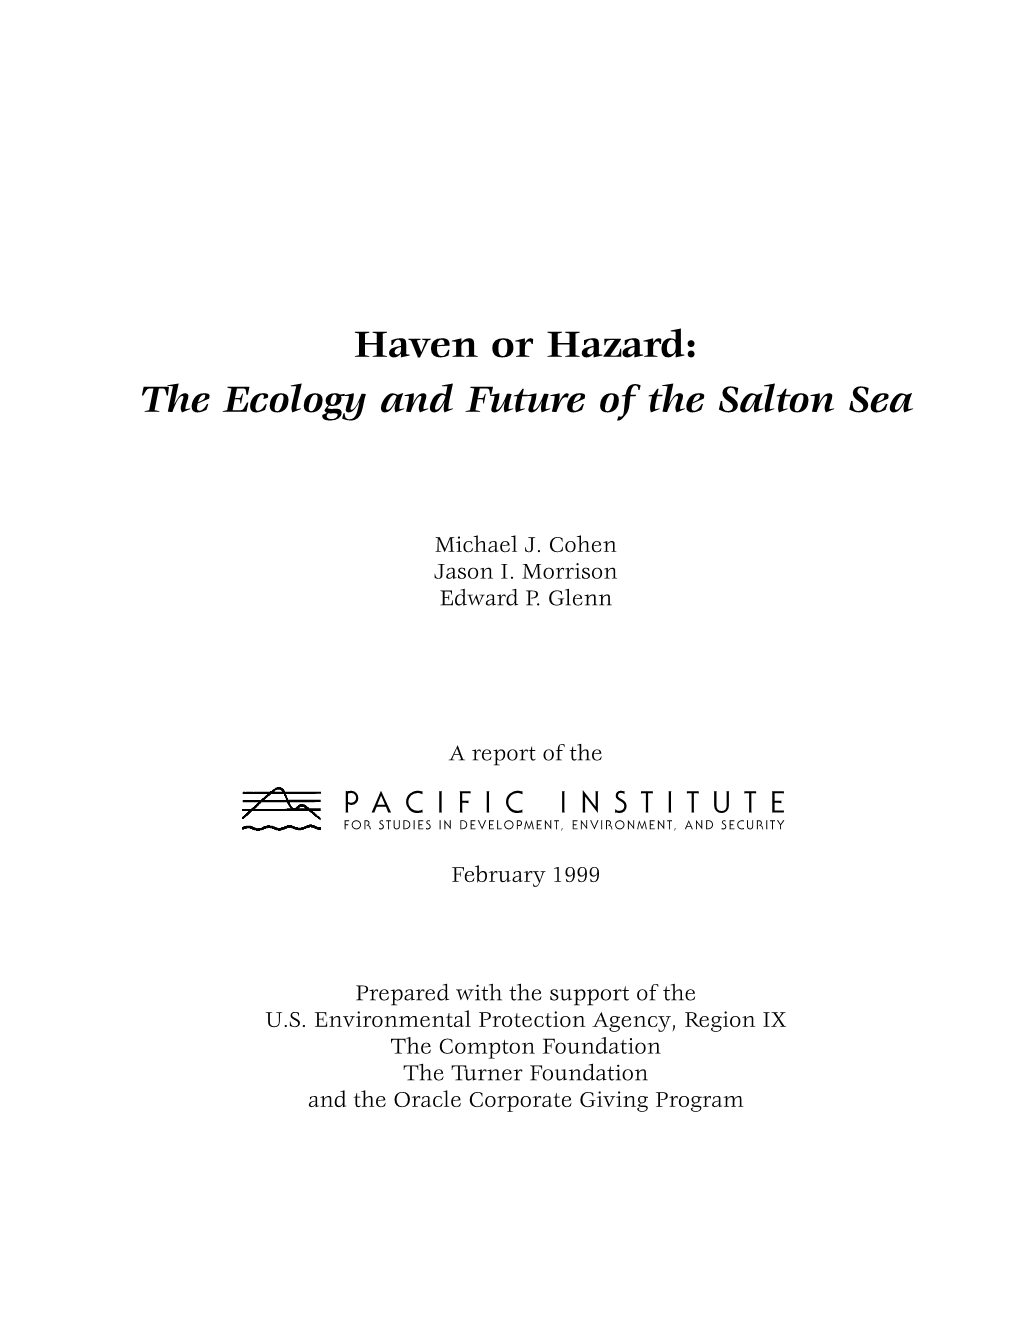 Haven Or Hazard: the Ecology and Future of the Salton Sea